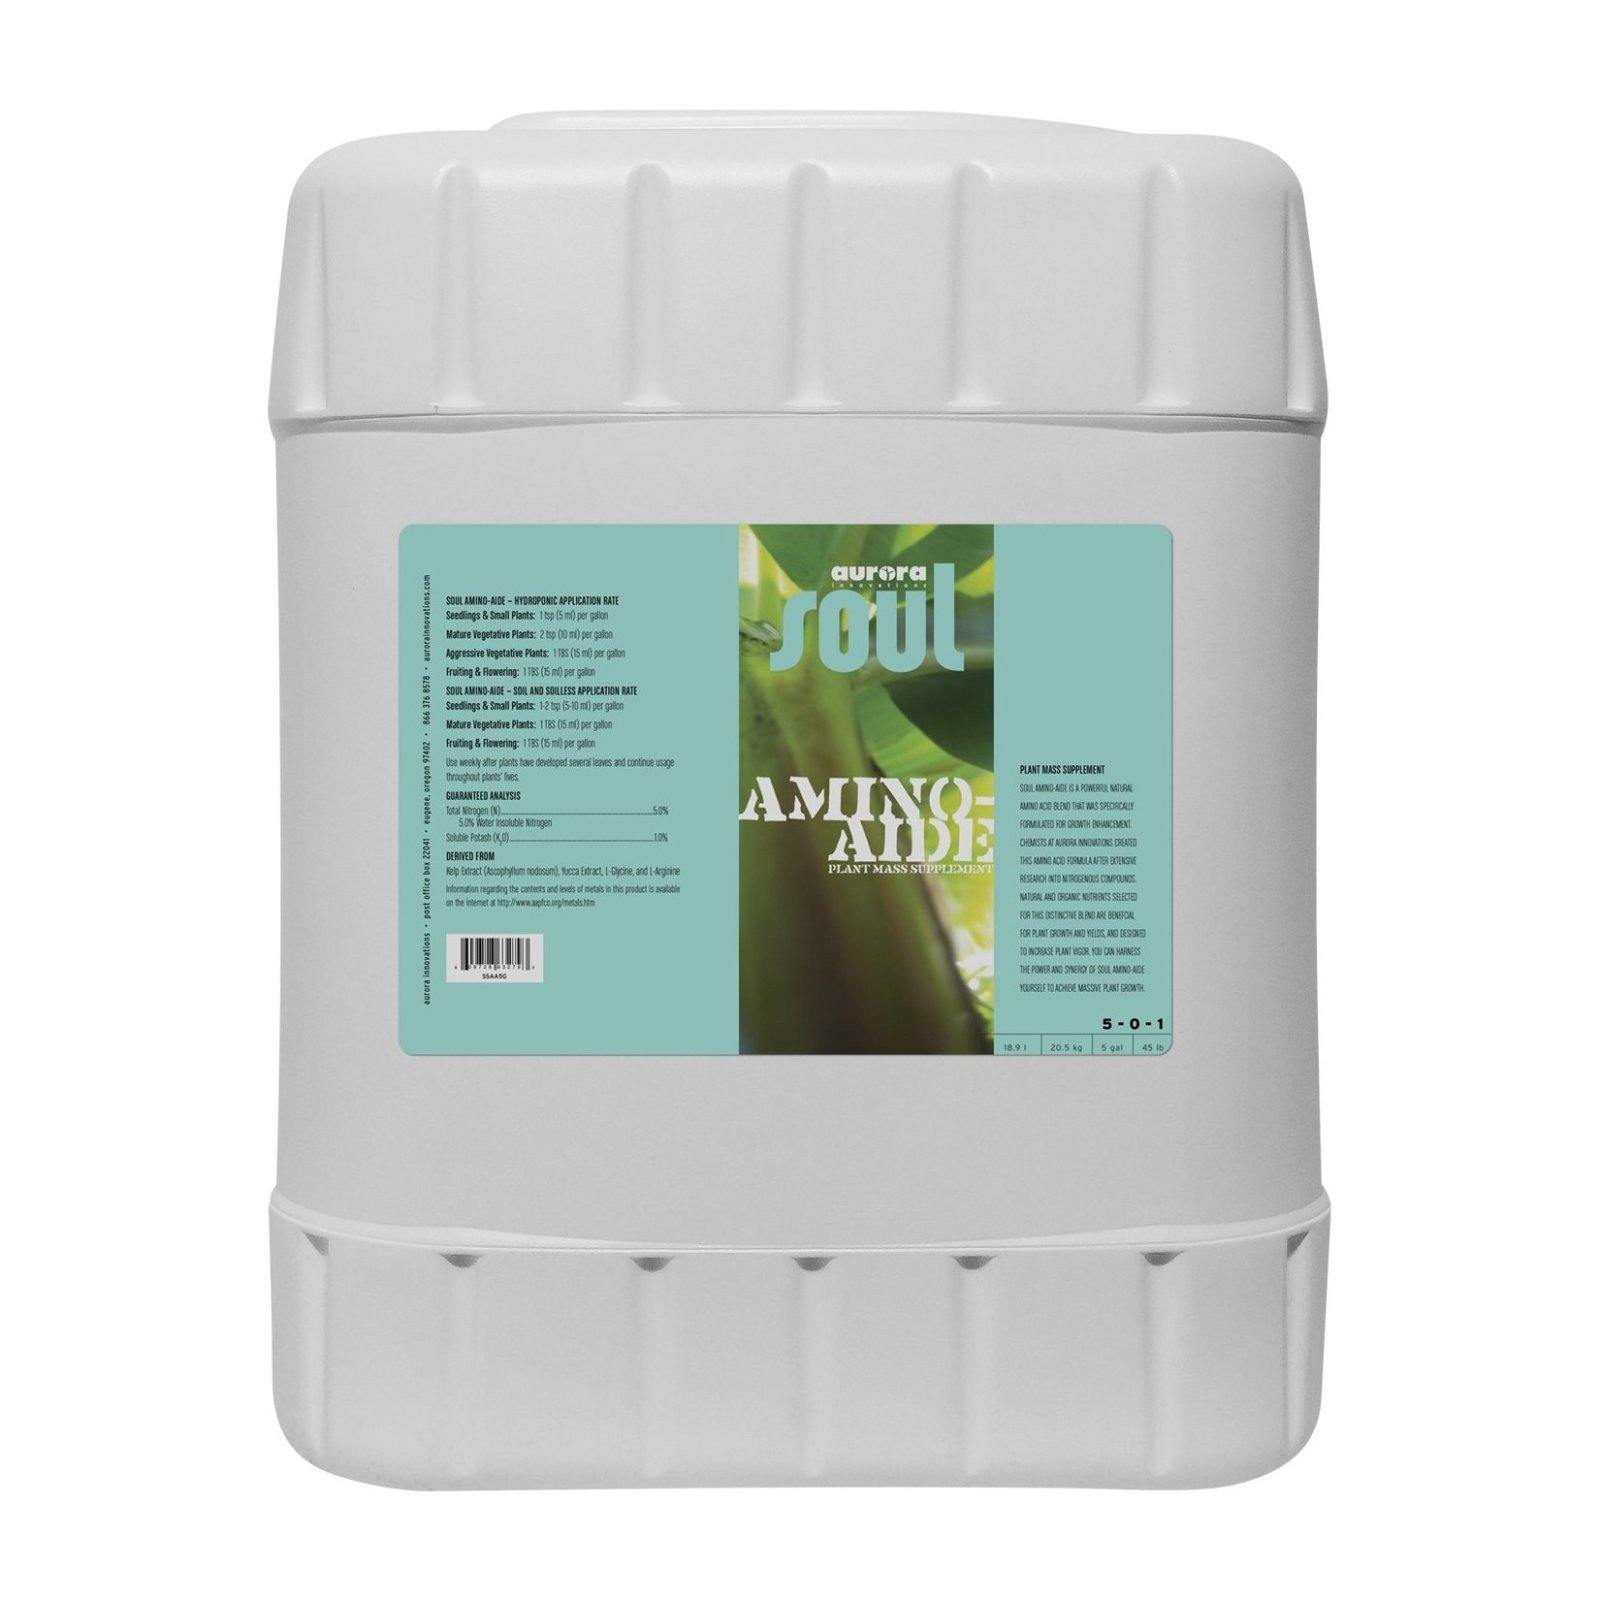 Nutrients, Additives & Solutions - Soul Amine Aide - 609728632779- Gardin Warehouse